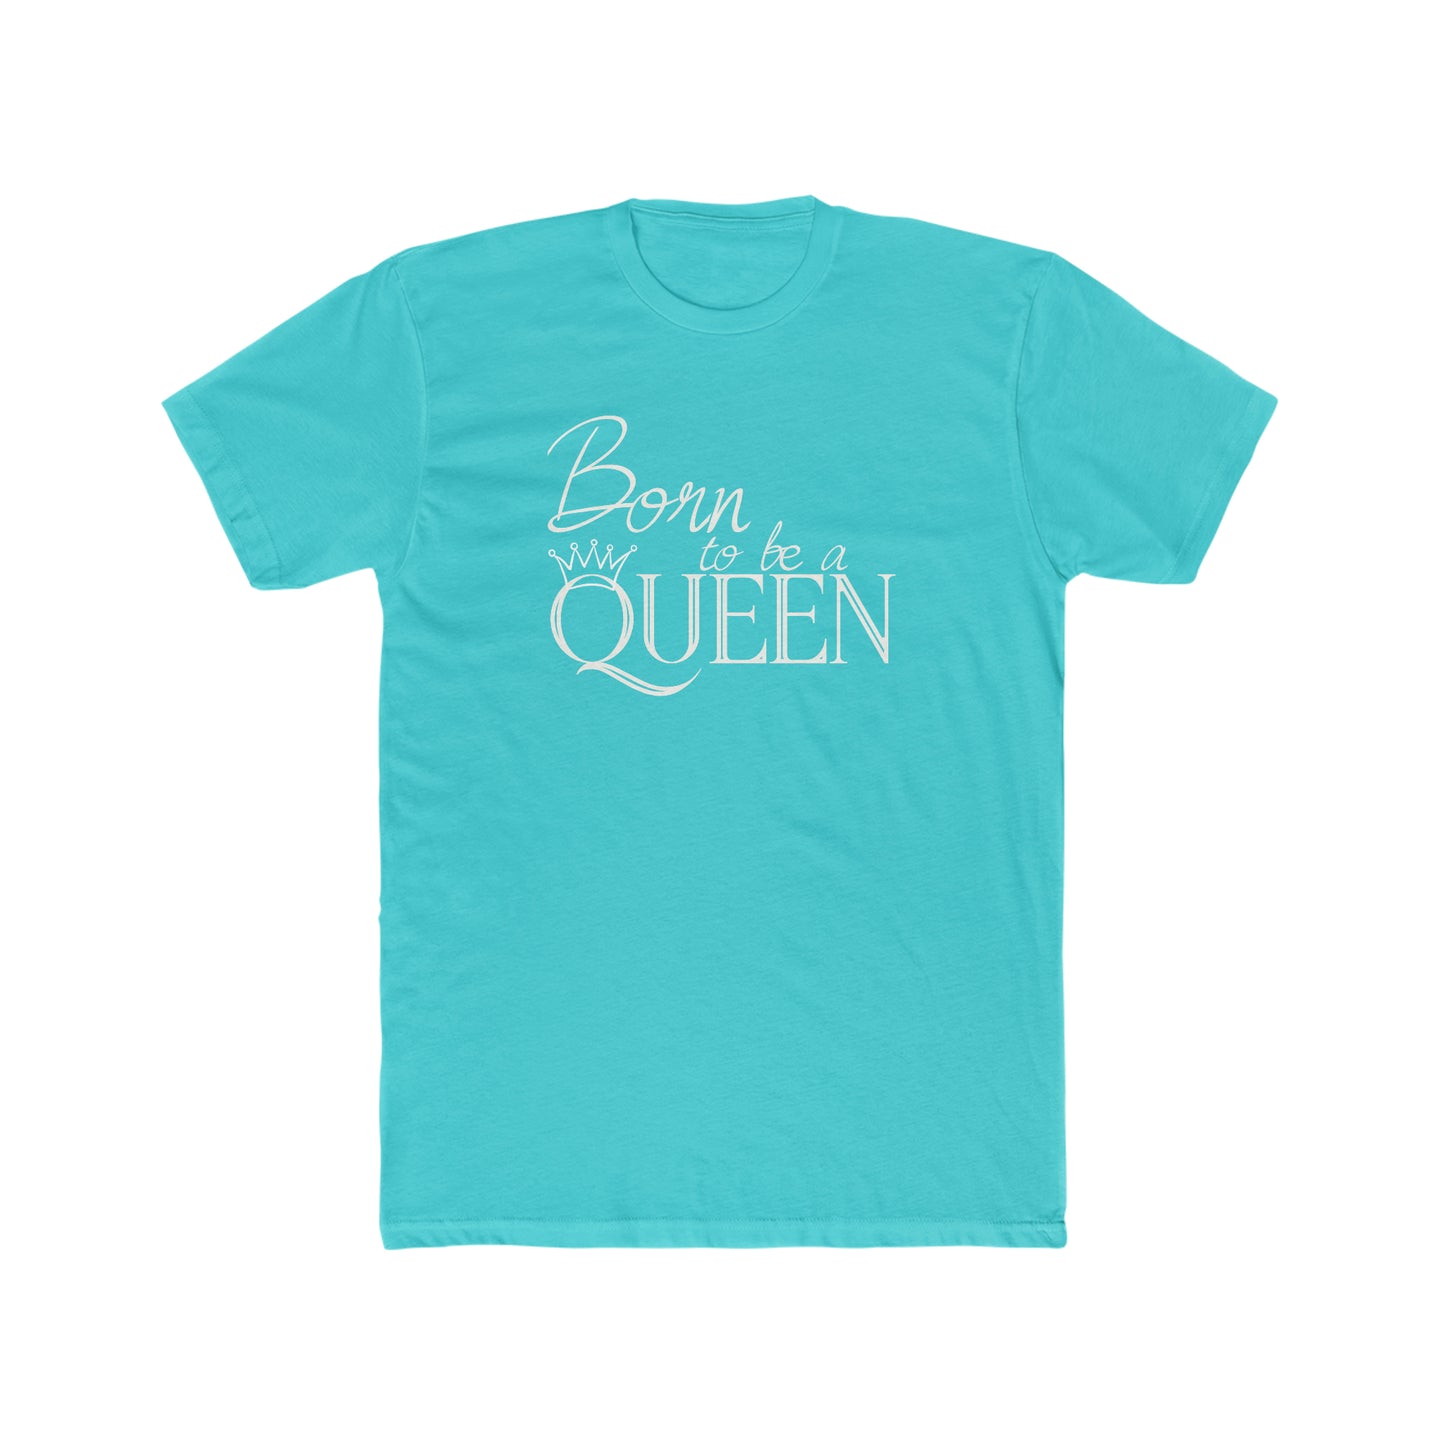 Born to be a Queen - Unisex Tee